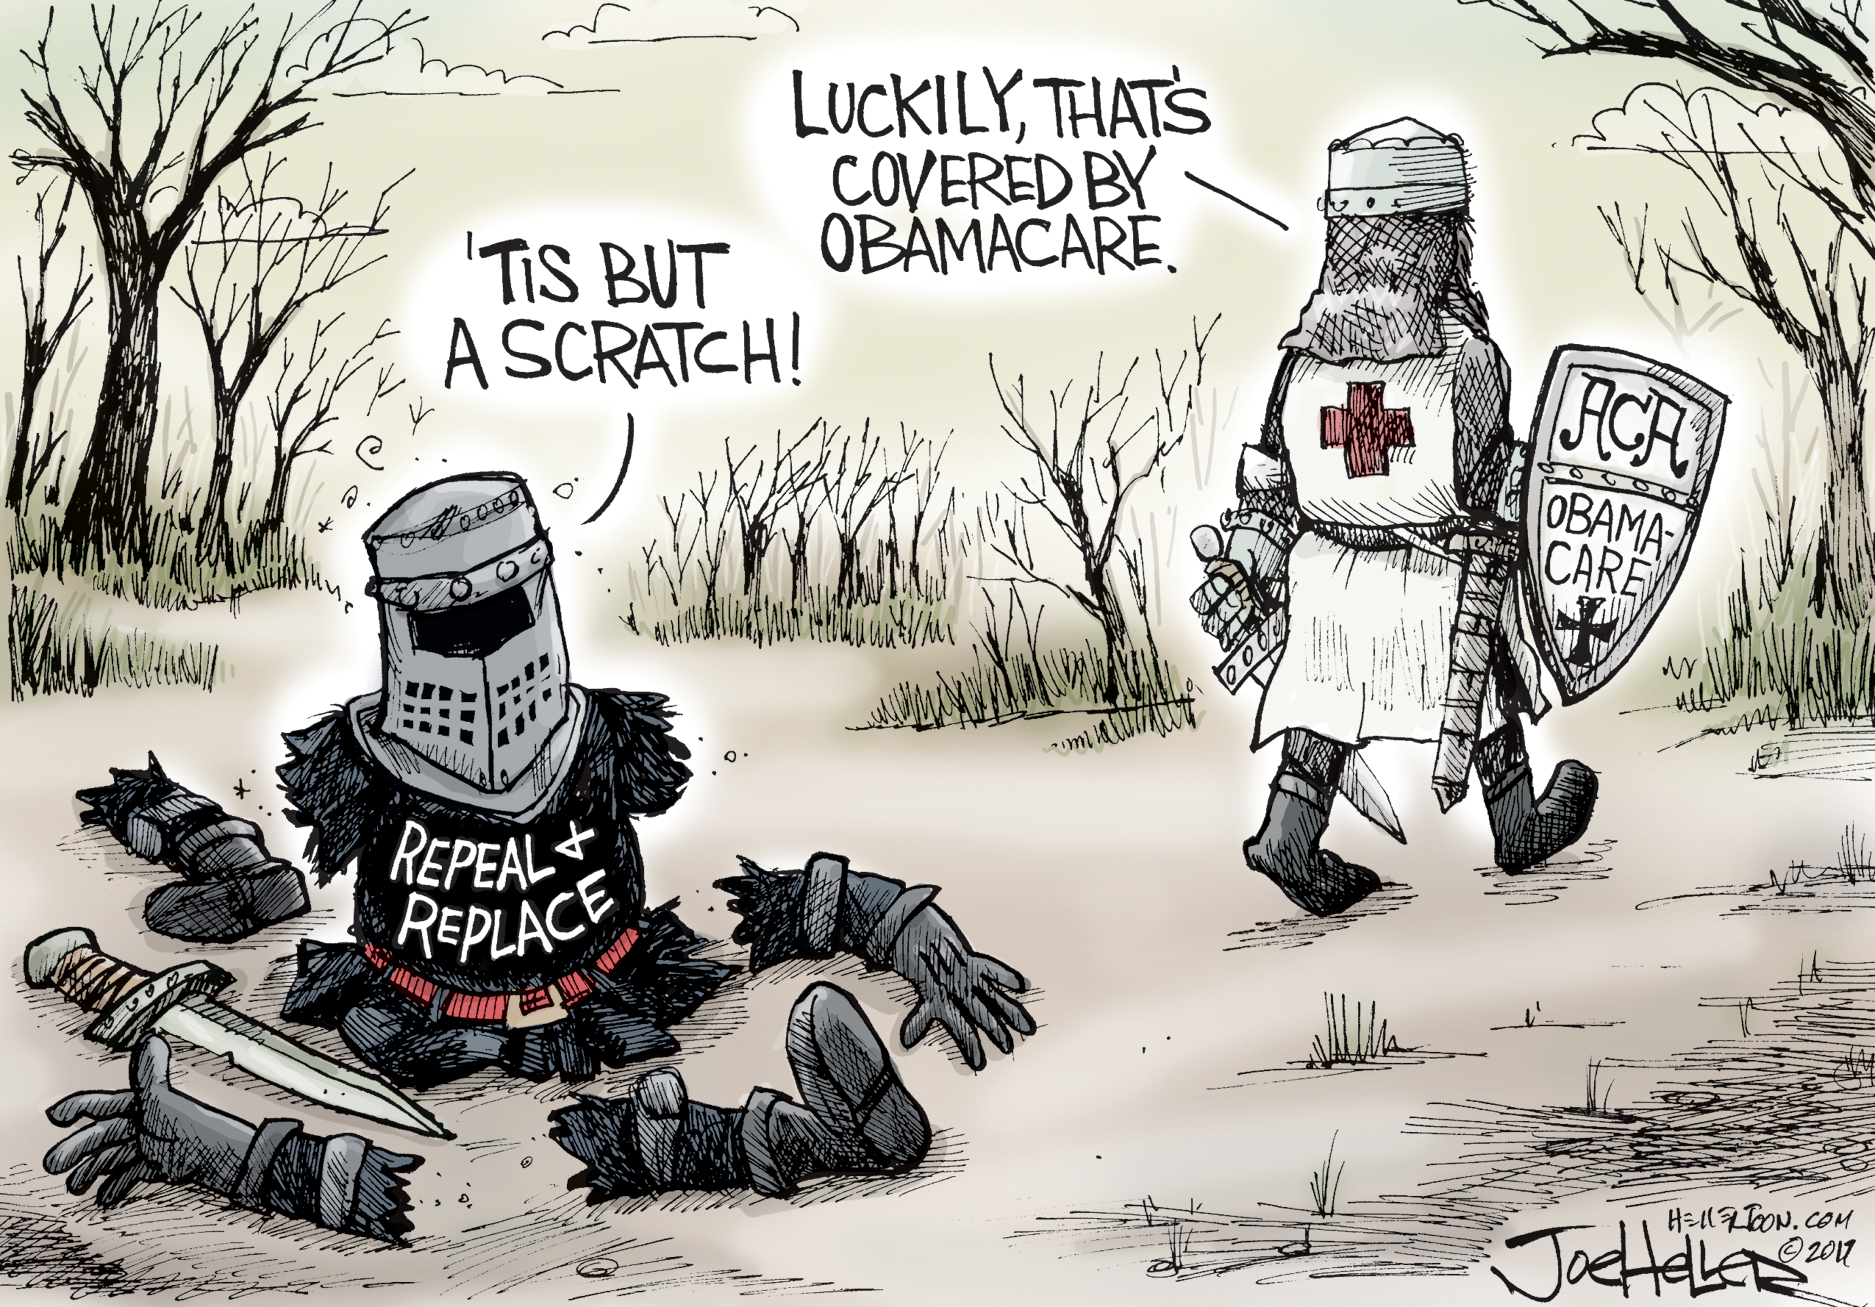 Political Cartoon . Monty Python Repeal Replace Obamacare health care  coverage